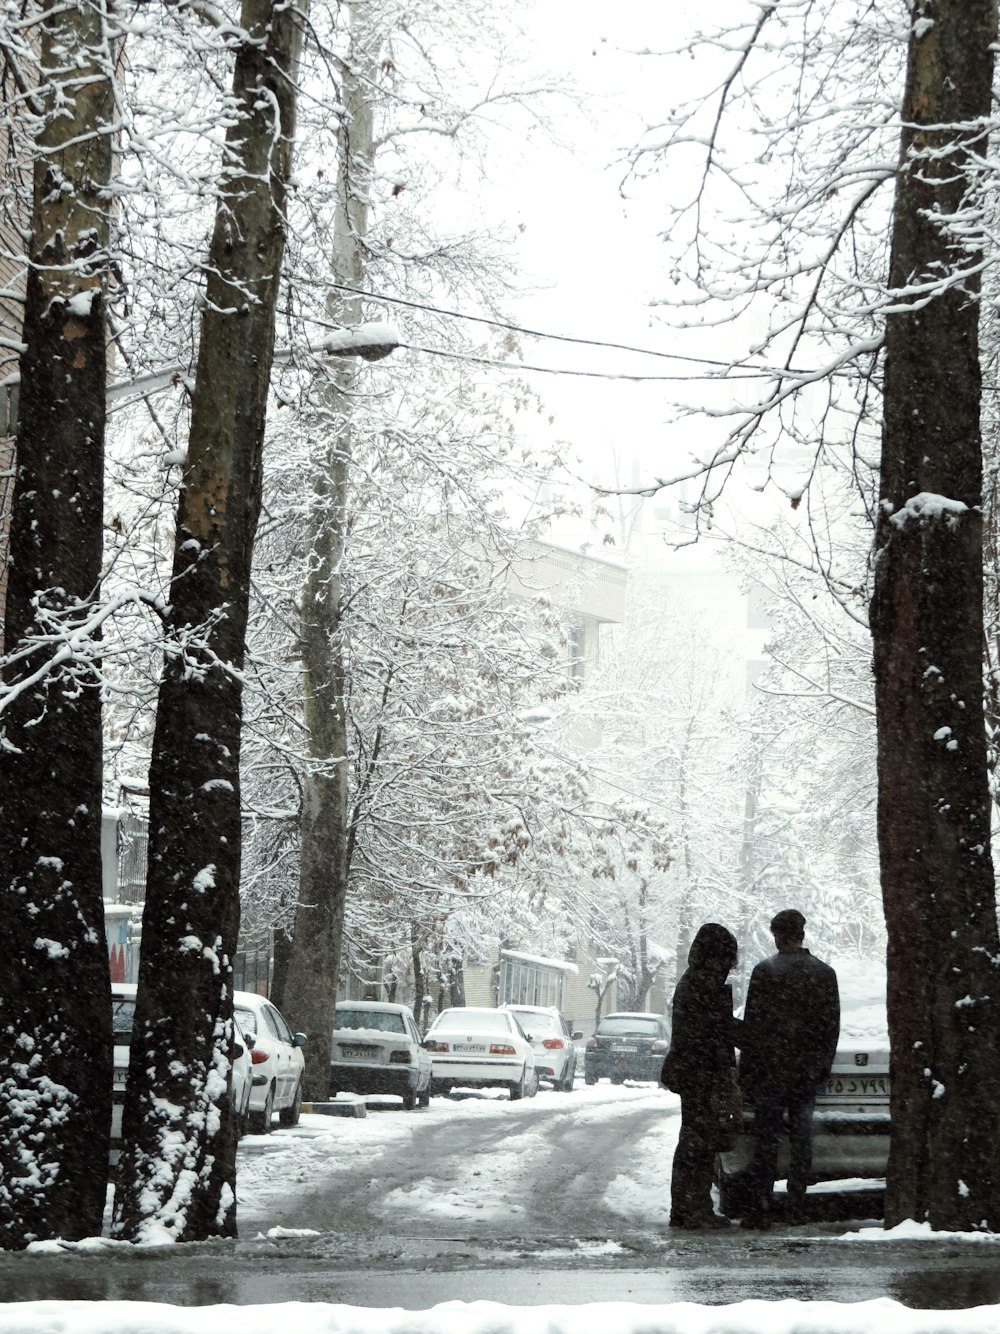 two people standing on a bench in the snow